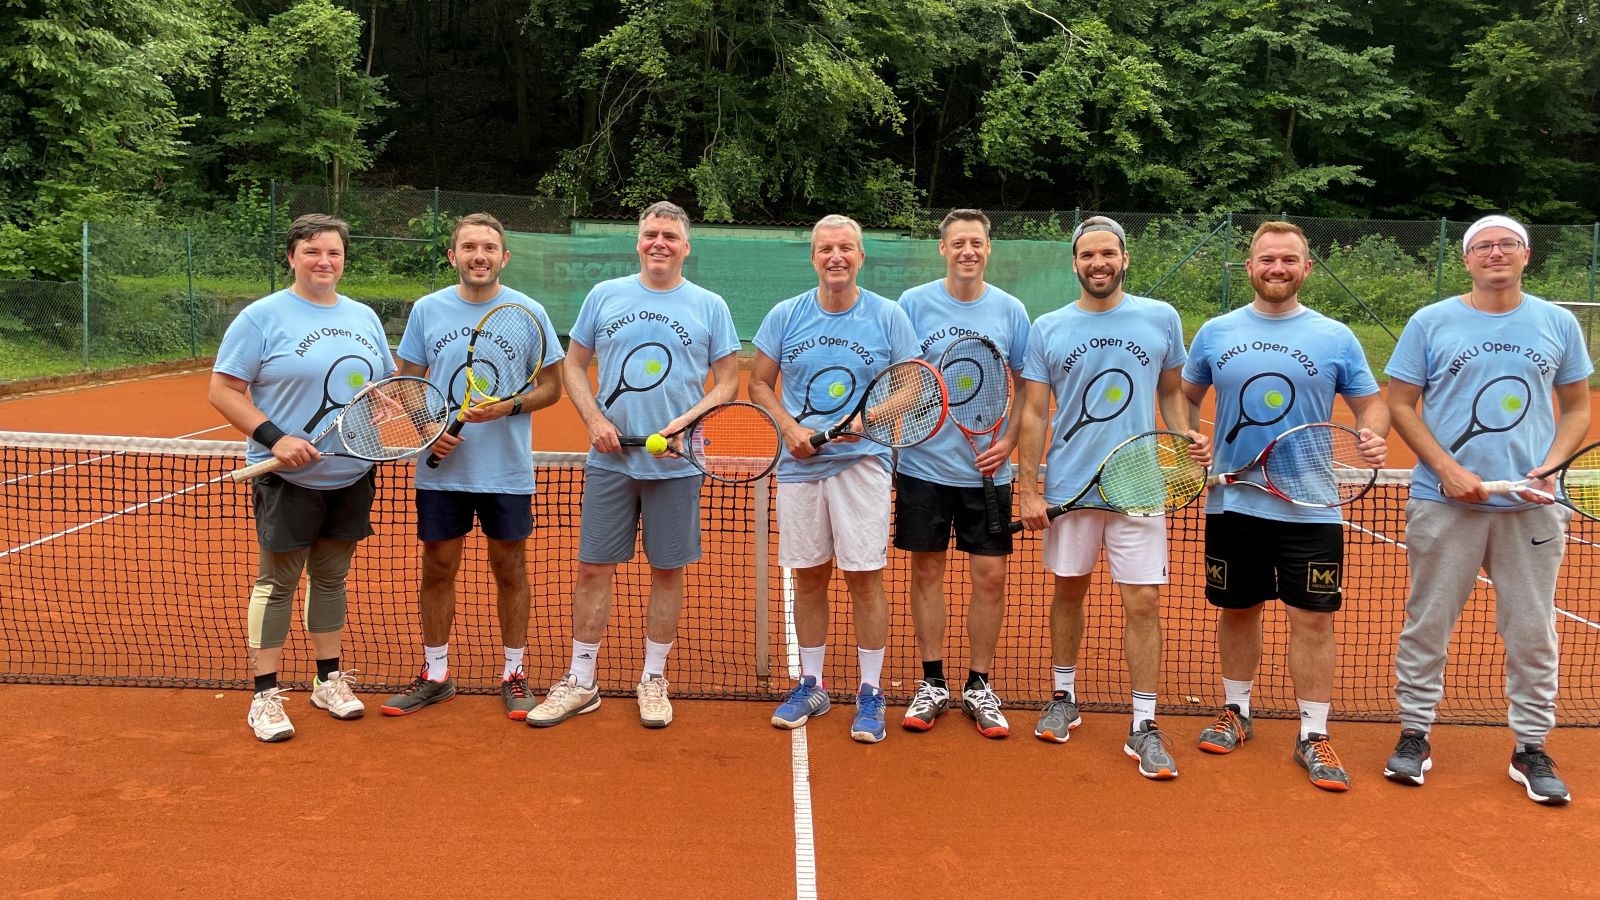 ARKU staff and management on the tennis court at the ARKU Open 2023.